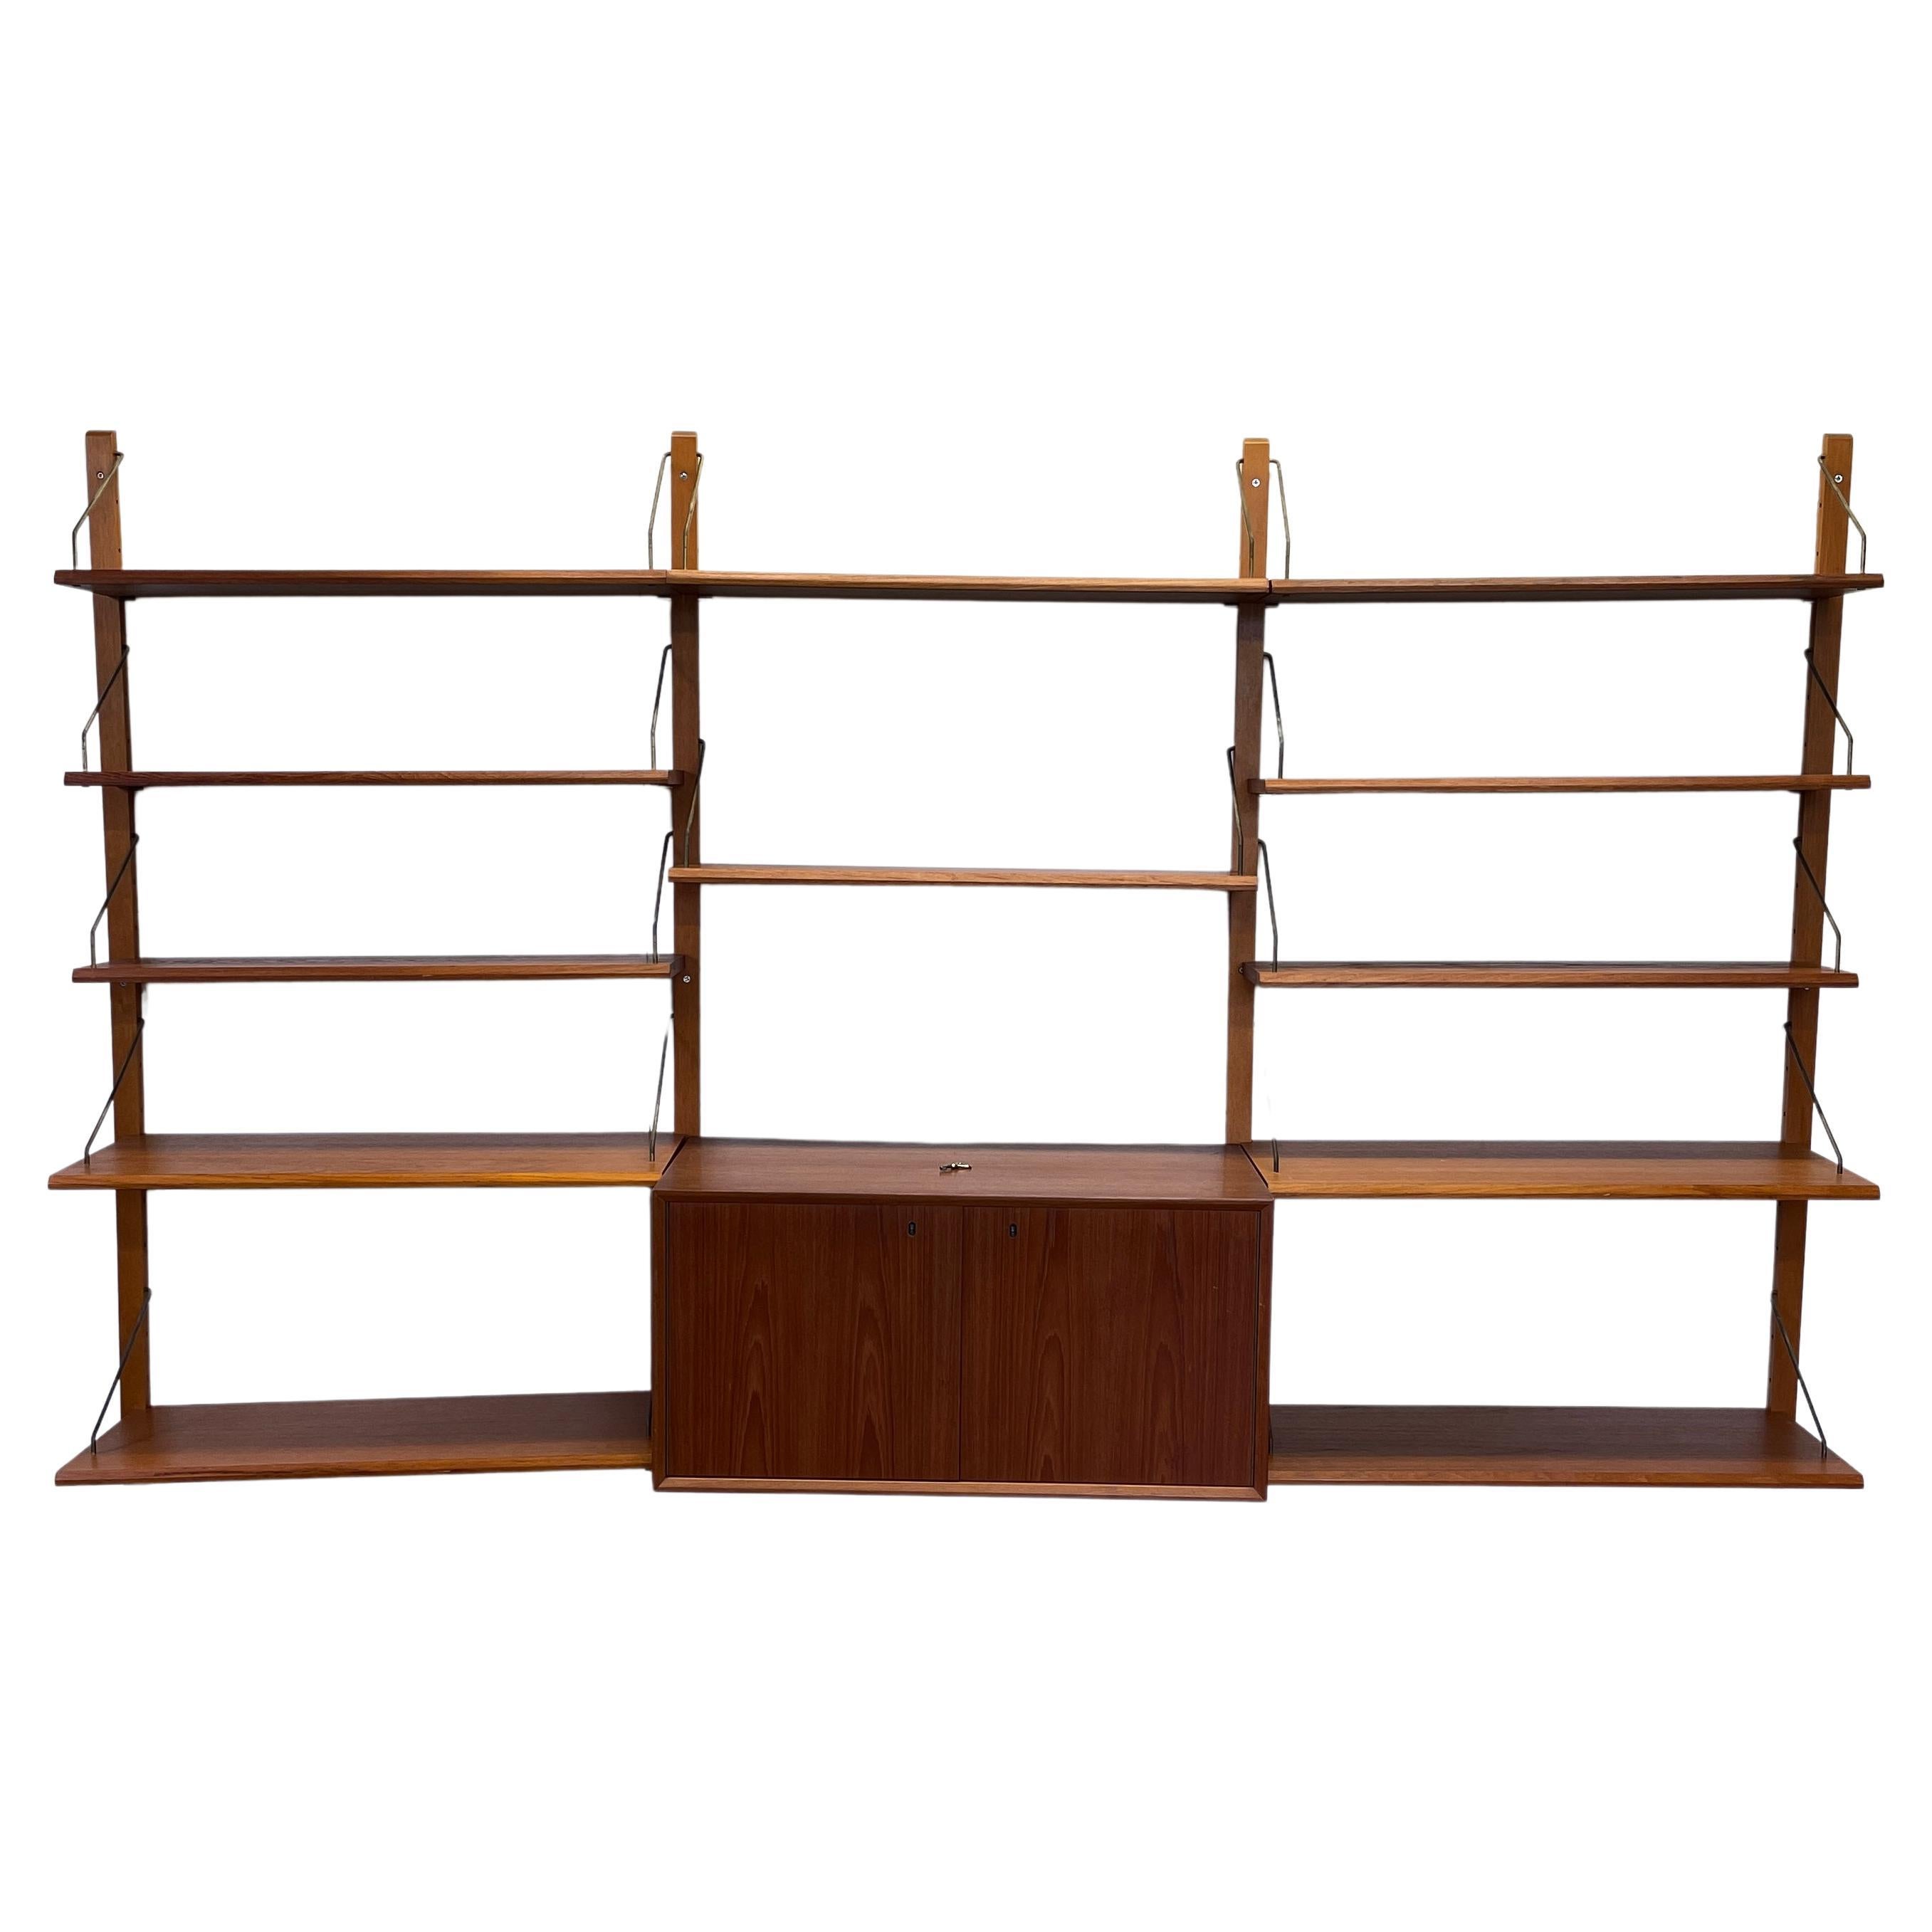 Step up your storage game with this gorgeous teakwood wall unit by Norwegian designer Fredrik A. Kayser. This wall unit is completely modular and can be set up as either a single 3-bay unit or as two single-bay units. When set up as a 3-bay unit it